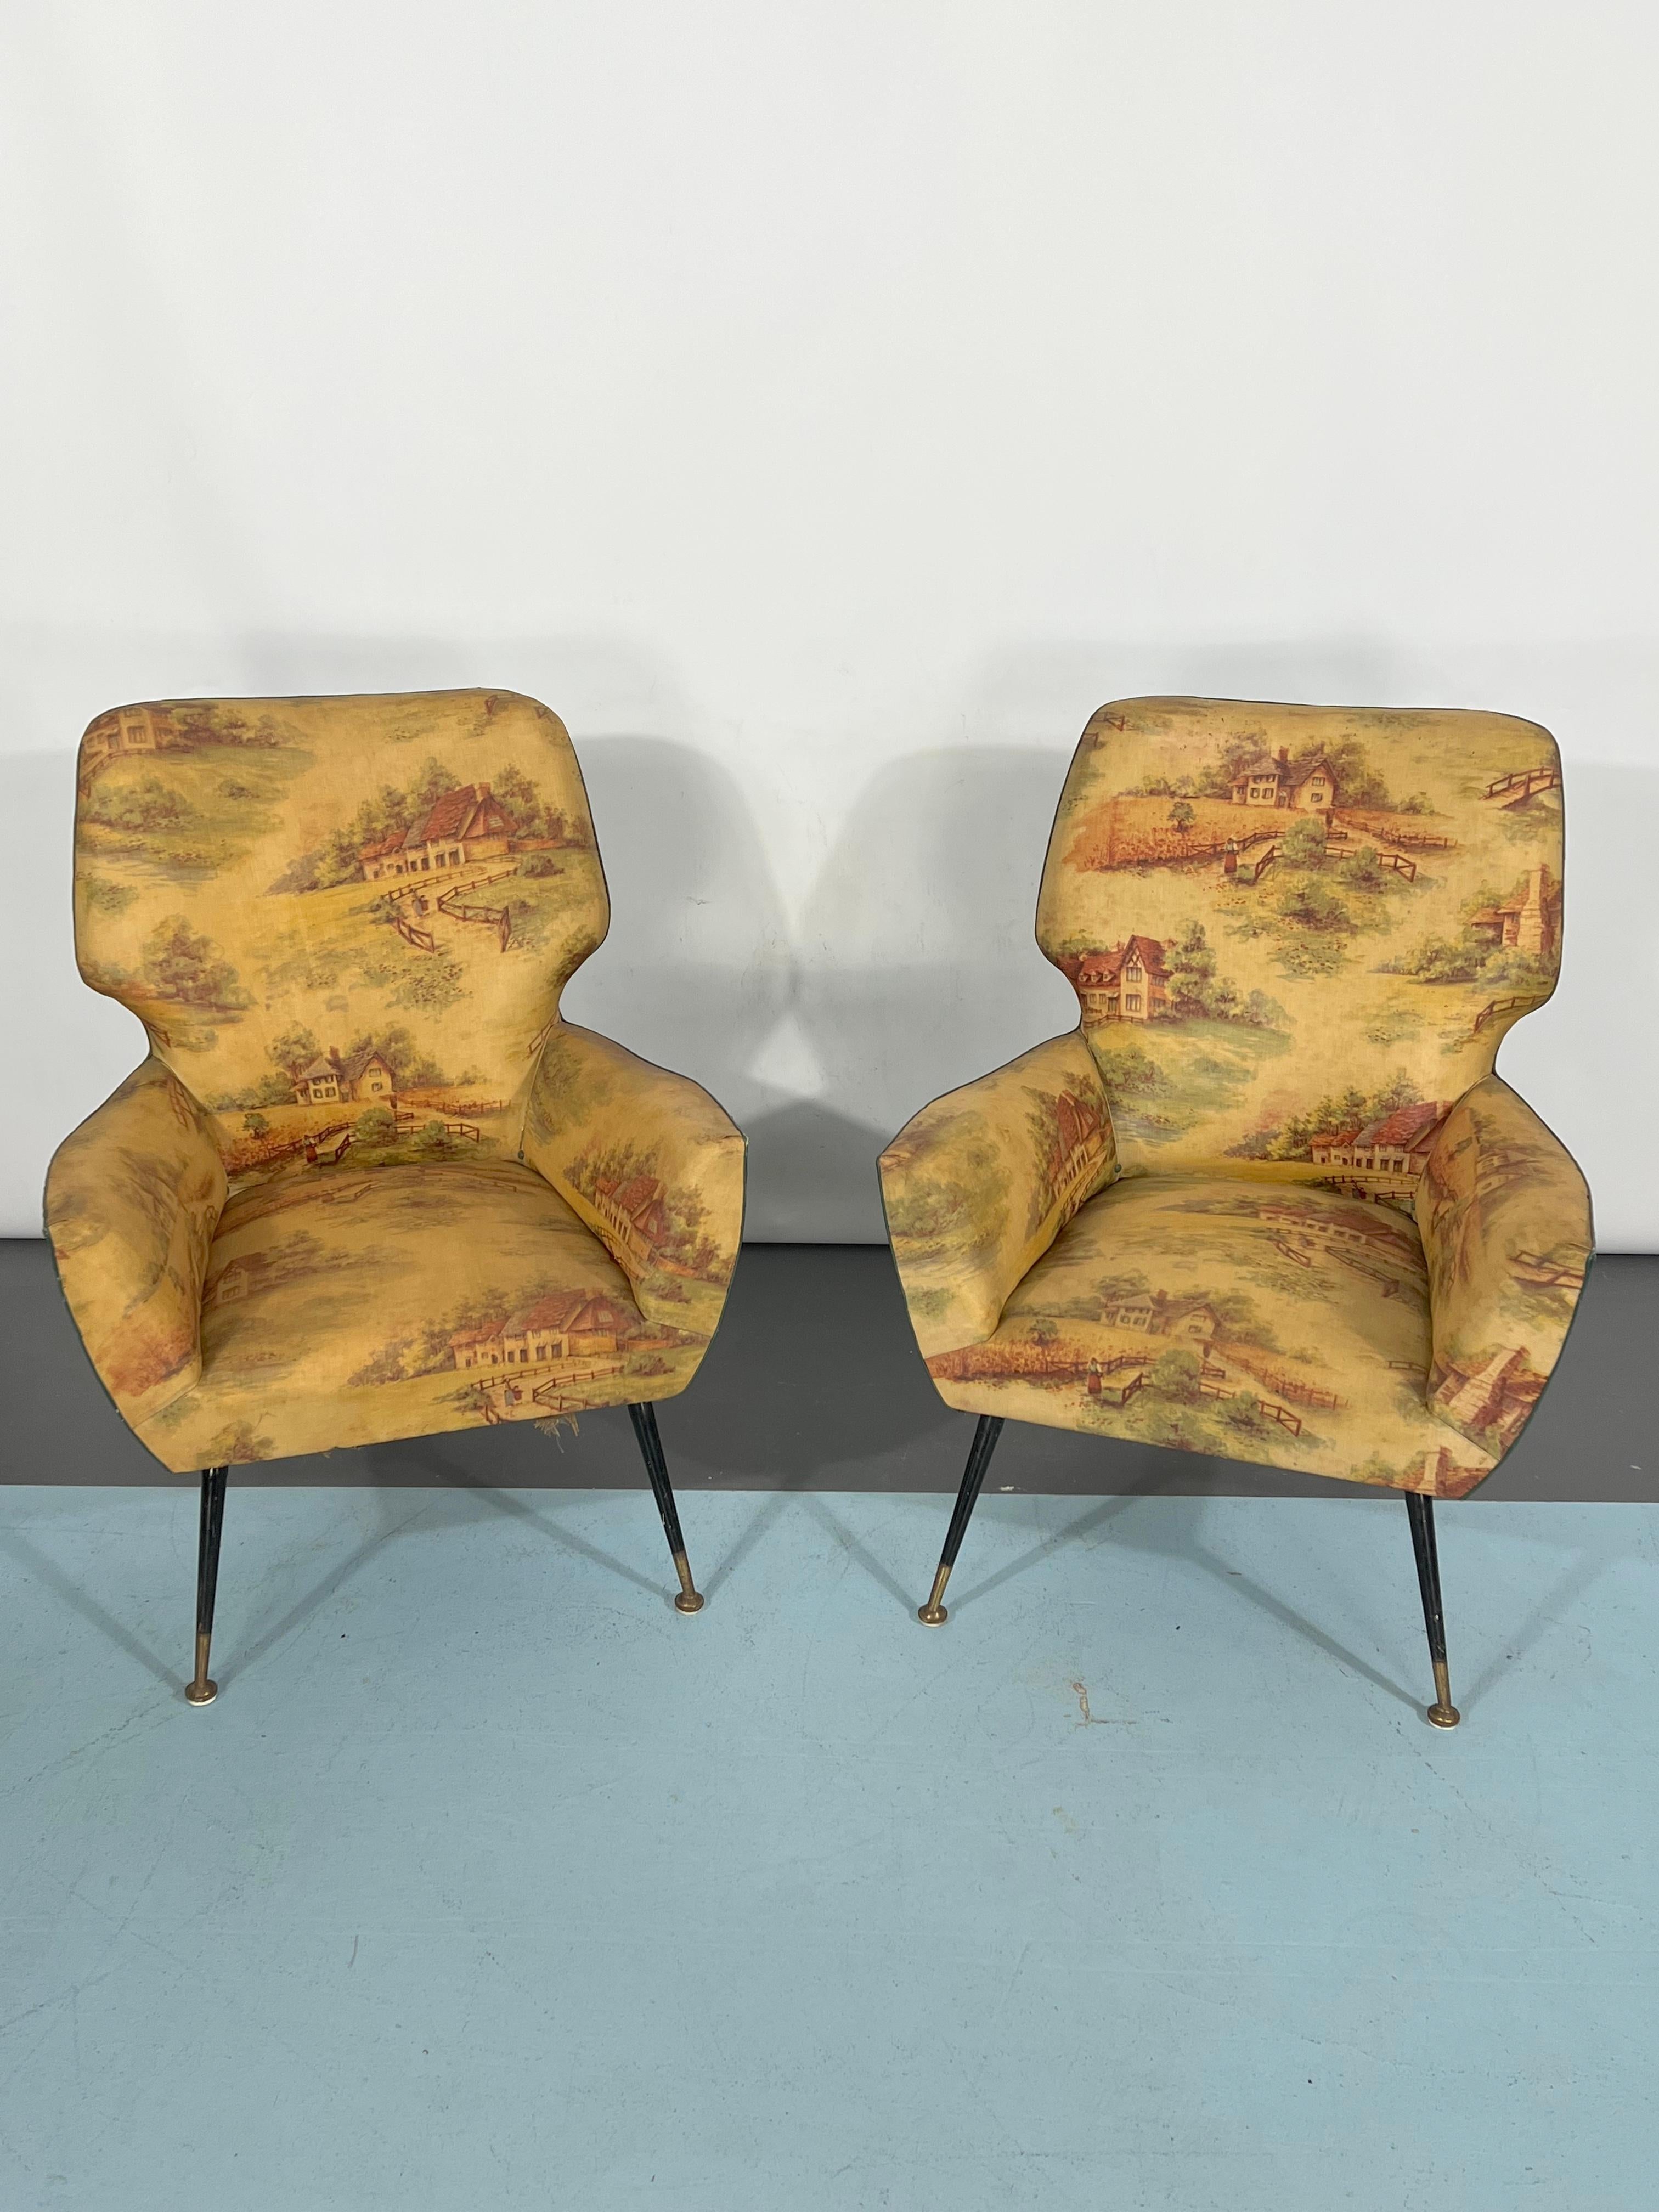 Vintage condition with original fabric for this set of two armchairs produced in Italy during the 1950s. They mount brass feet. Evident trace of age and use and some defects on the fabric.